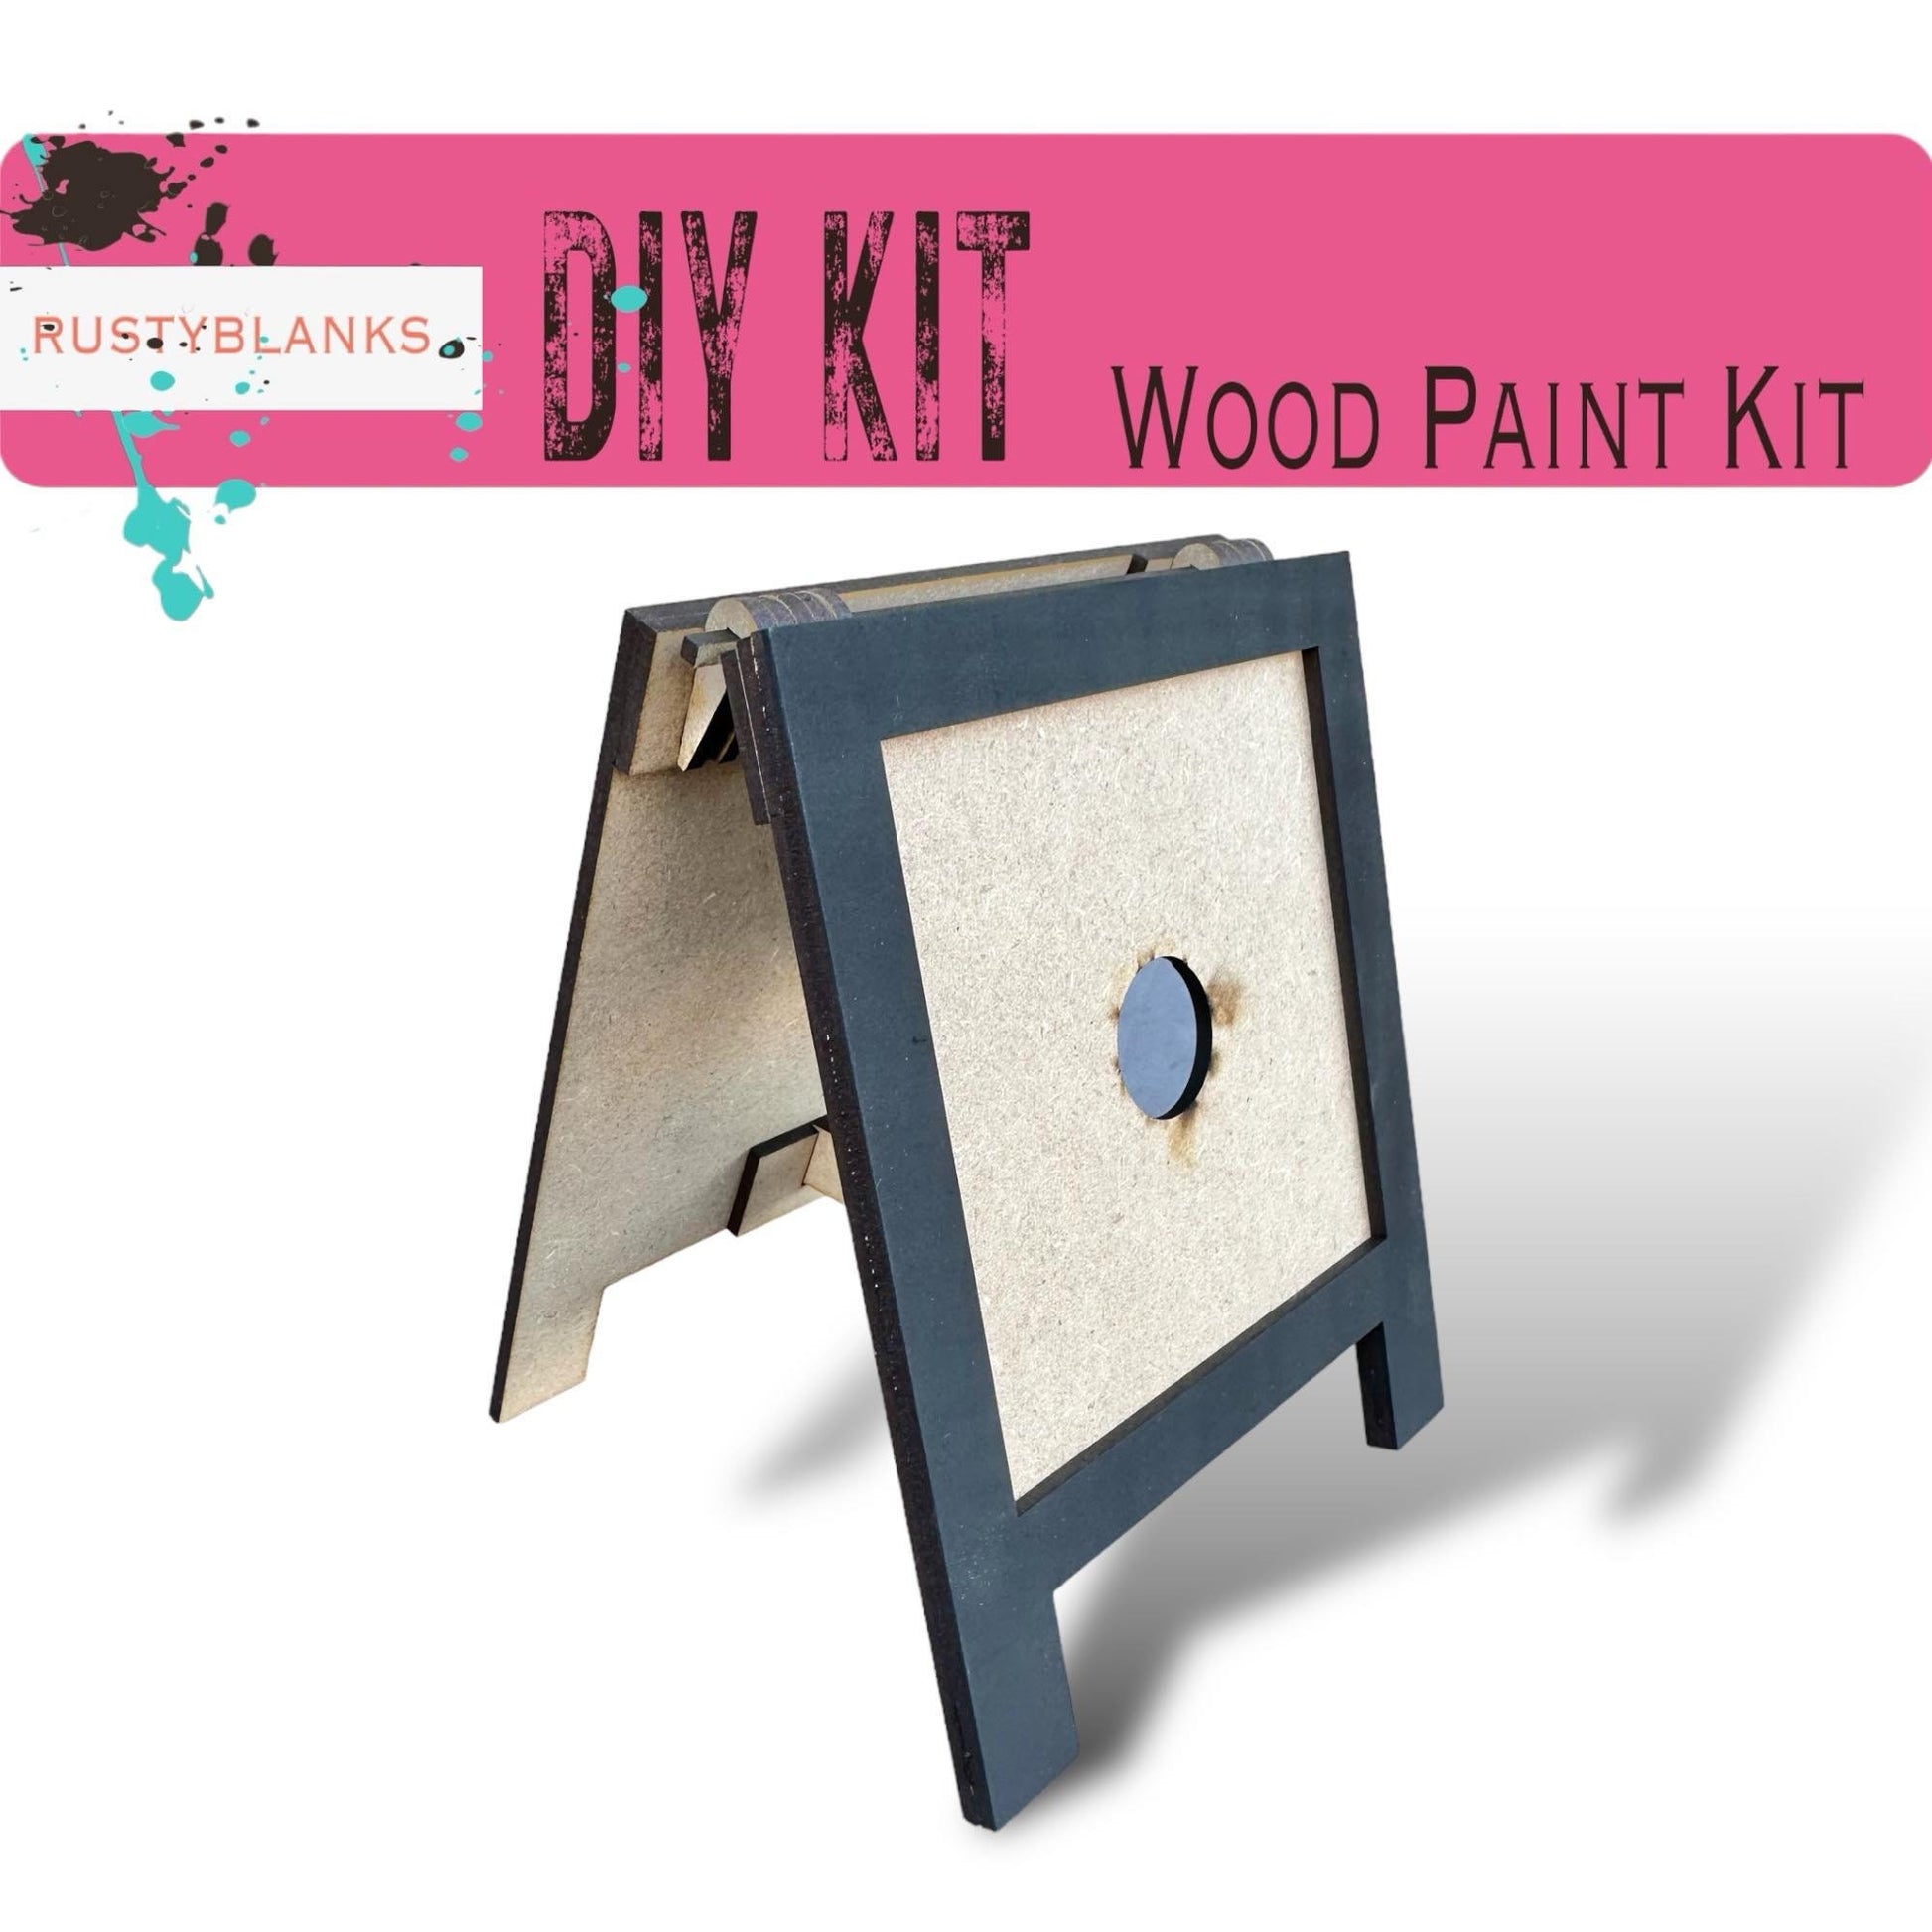 a wooden paint kit with a hole in it